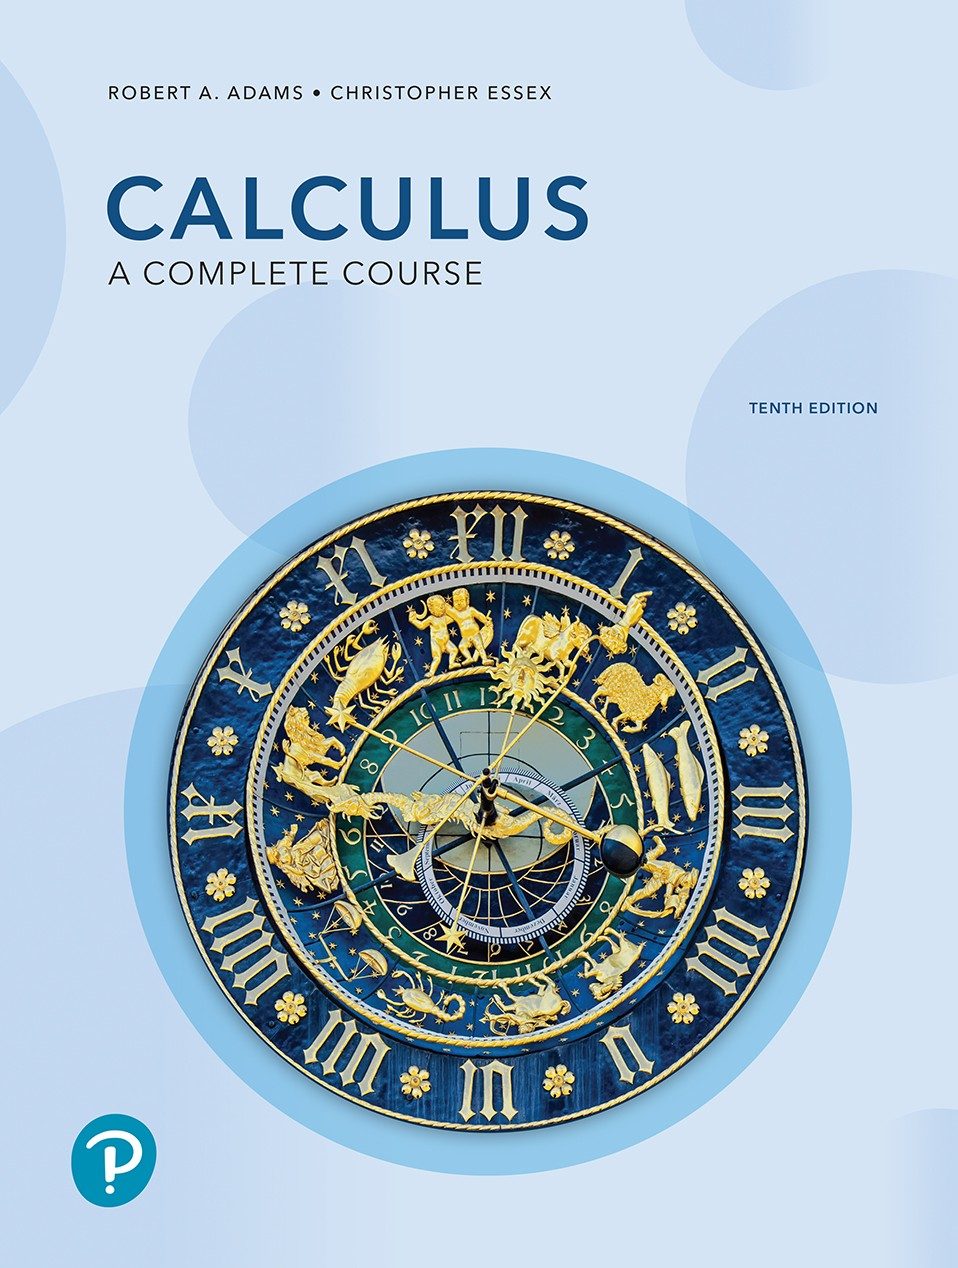 Calculus: A Complete Course 10th Edition, Student Solutions Manual e-book